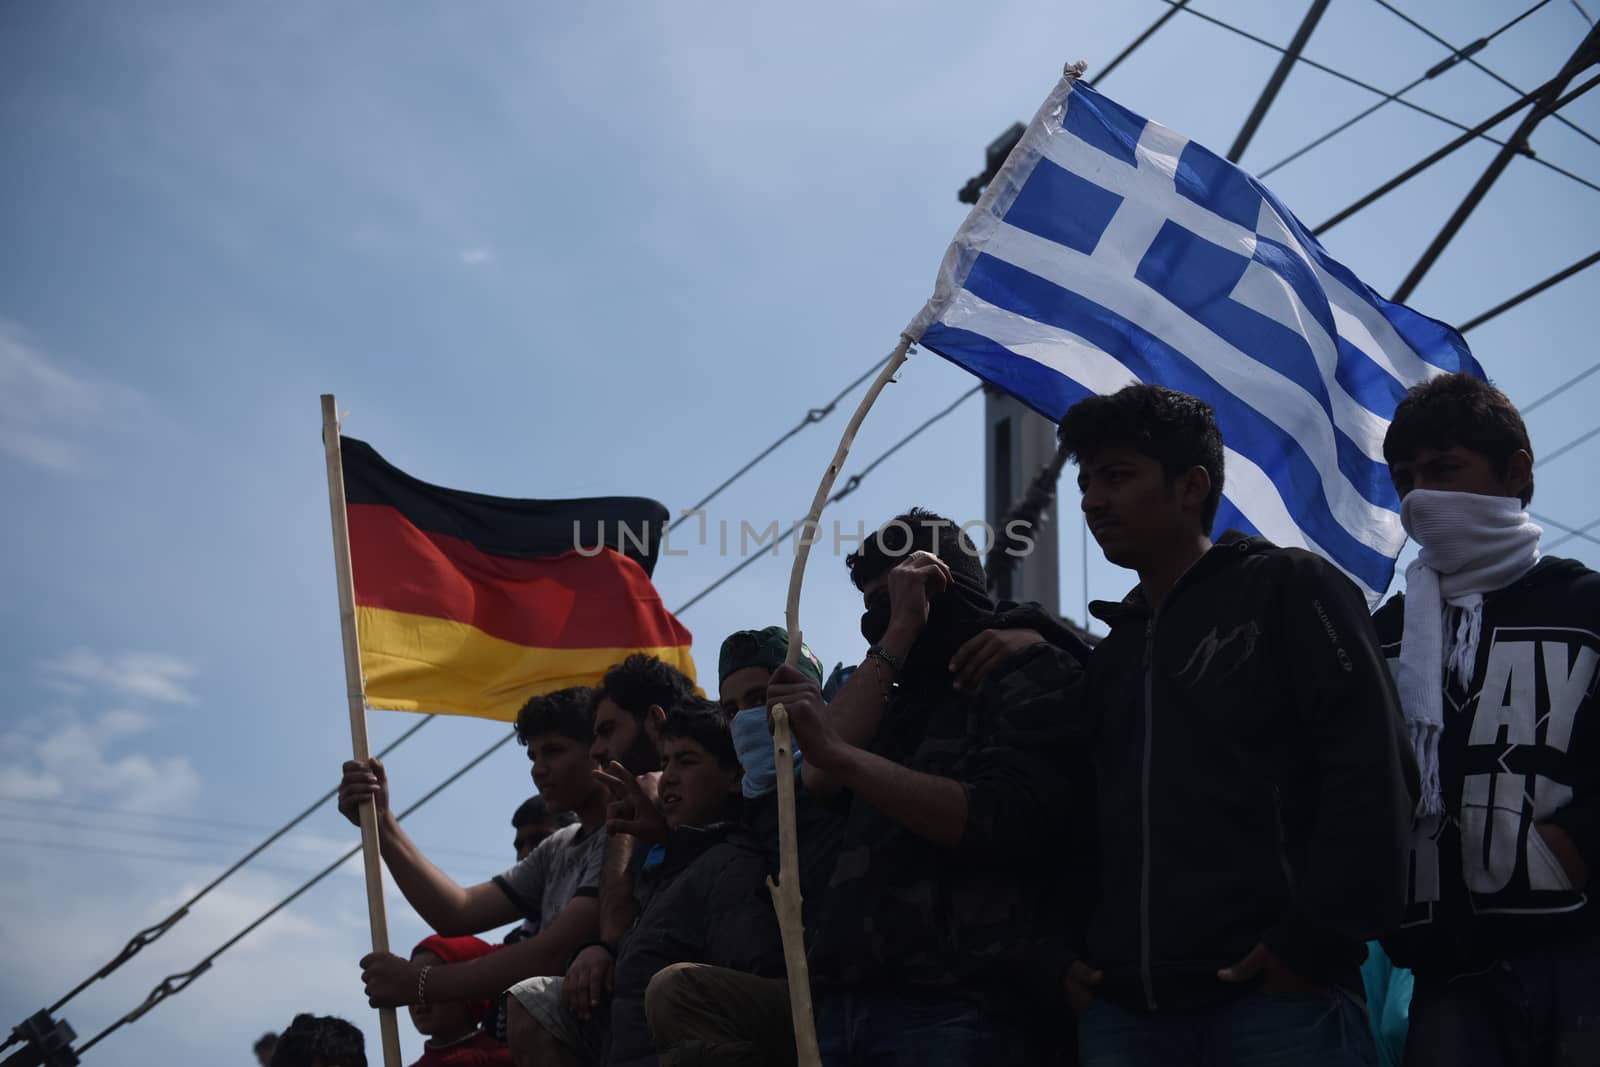 GREECE, Idomeni: Migrants hold up the Greek and German flags near the Macedonia-Greek border on April 11, 2016.Hundreds of migrants were injured on Sunday as they attempted to cross the border into Macedonia. Police used tear gas, water cannons, and stun grenades to disperse the crowd as migrants threw stones in retaliation. 